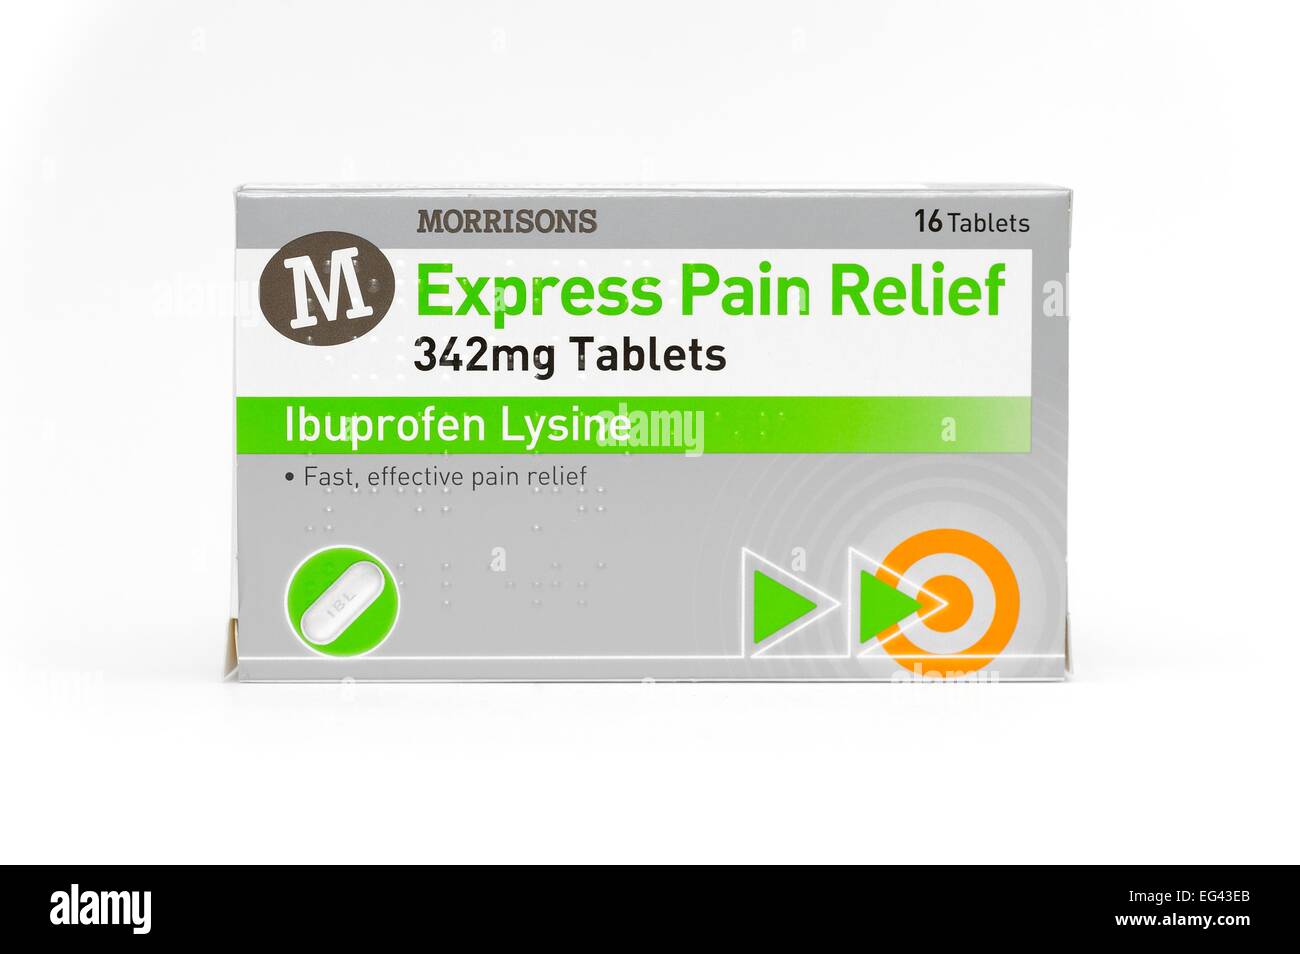 Morrisons own label express pain relief 342mg tablets retail pack Stock Photo